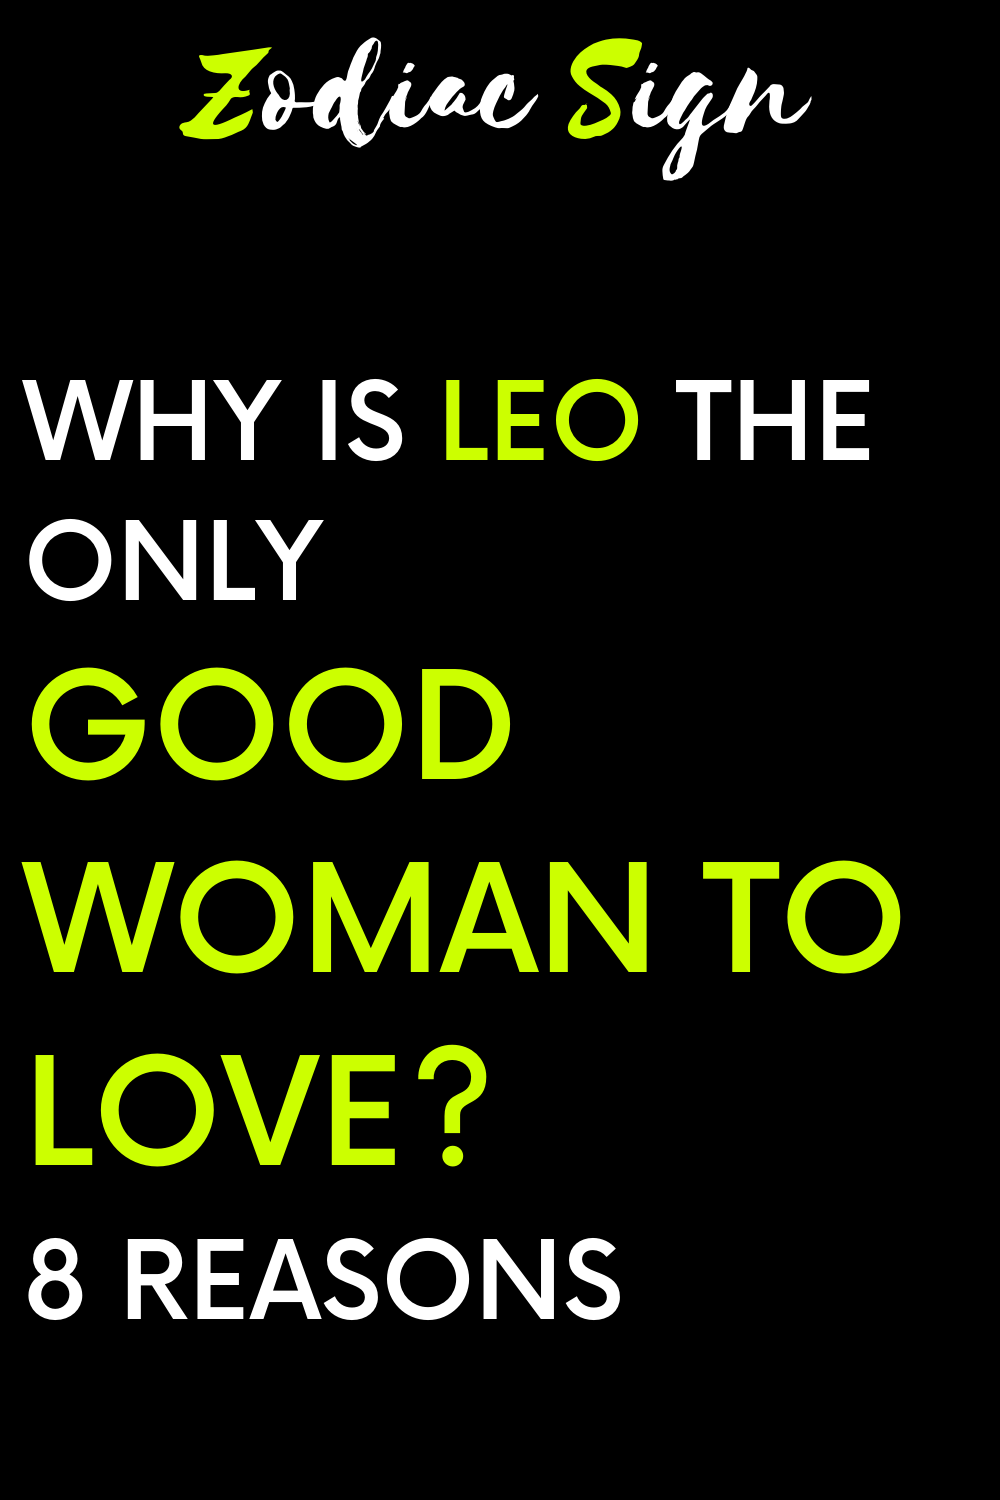 Why is Leo the only good woman to love? 8 reasons